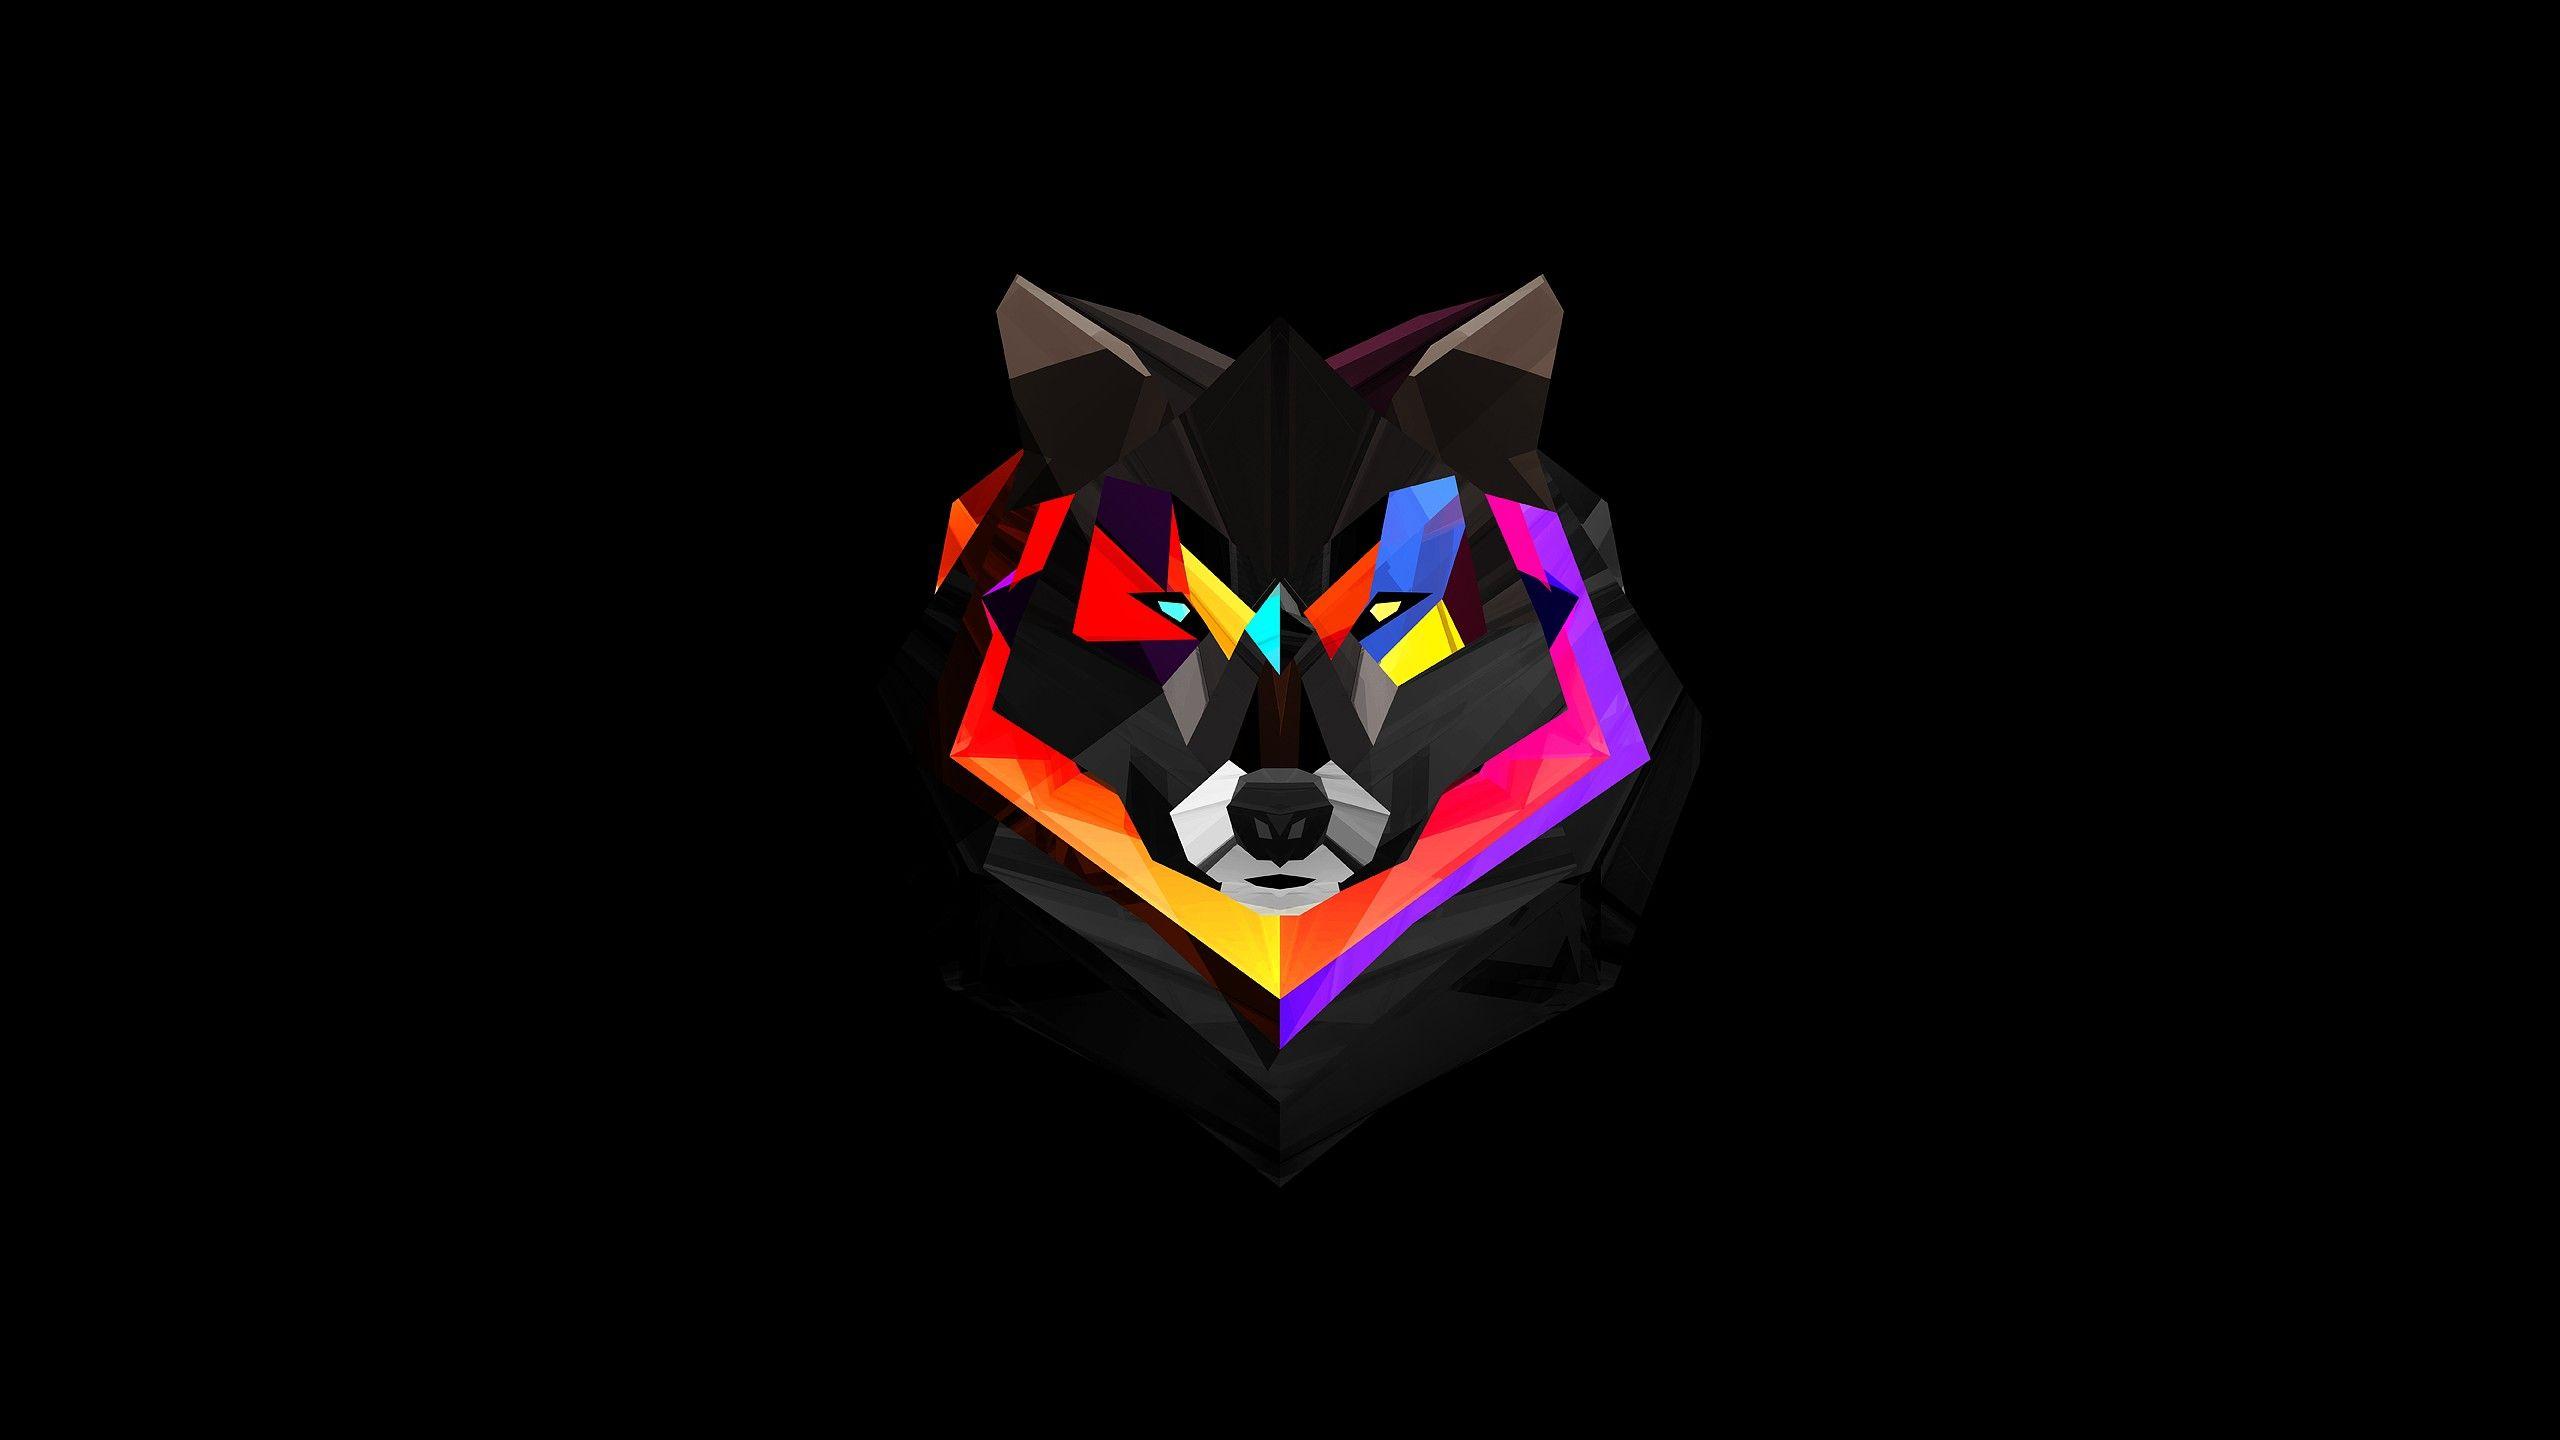 Awesome animals wallpaper. Polygon art, Wolf wallpaper, iPhone 5s wallpaper